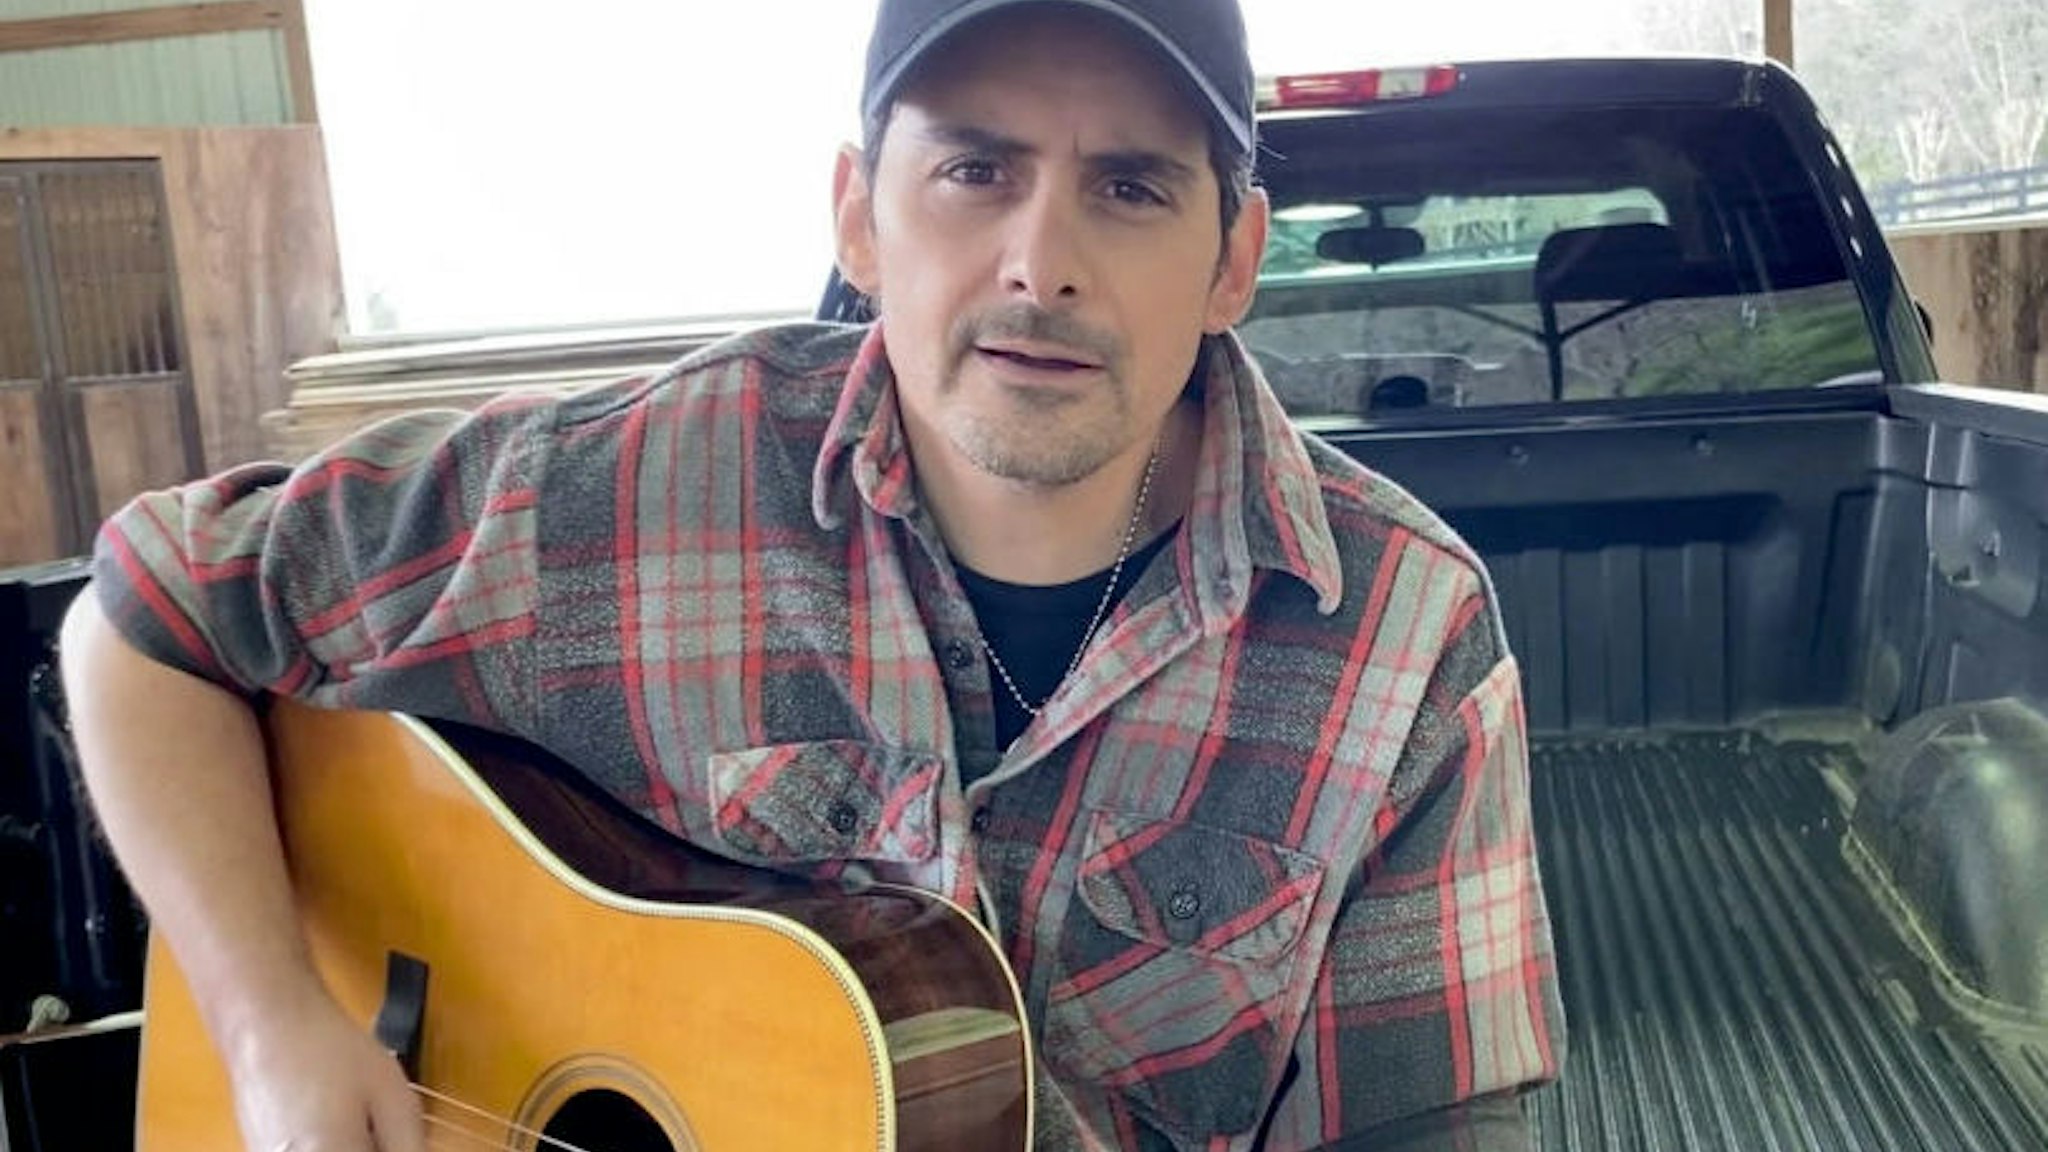 A star-studded lineup will perform on ACM¬Æ PRESENTS: OUR COUNTRY, a new two-hour special featuring intimate conversations and at-home acoustic performances with Country Music's biggest stars, along with clips of their favorite moments from the Academy of Country Music Awards' 55-year history. Pictured: Brad Paisley. Photo is a screen grab. (Photo by CBS via Getty Images)